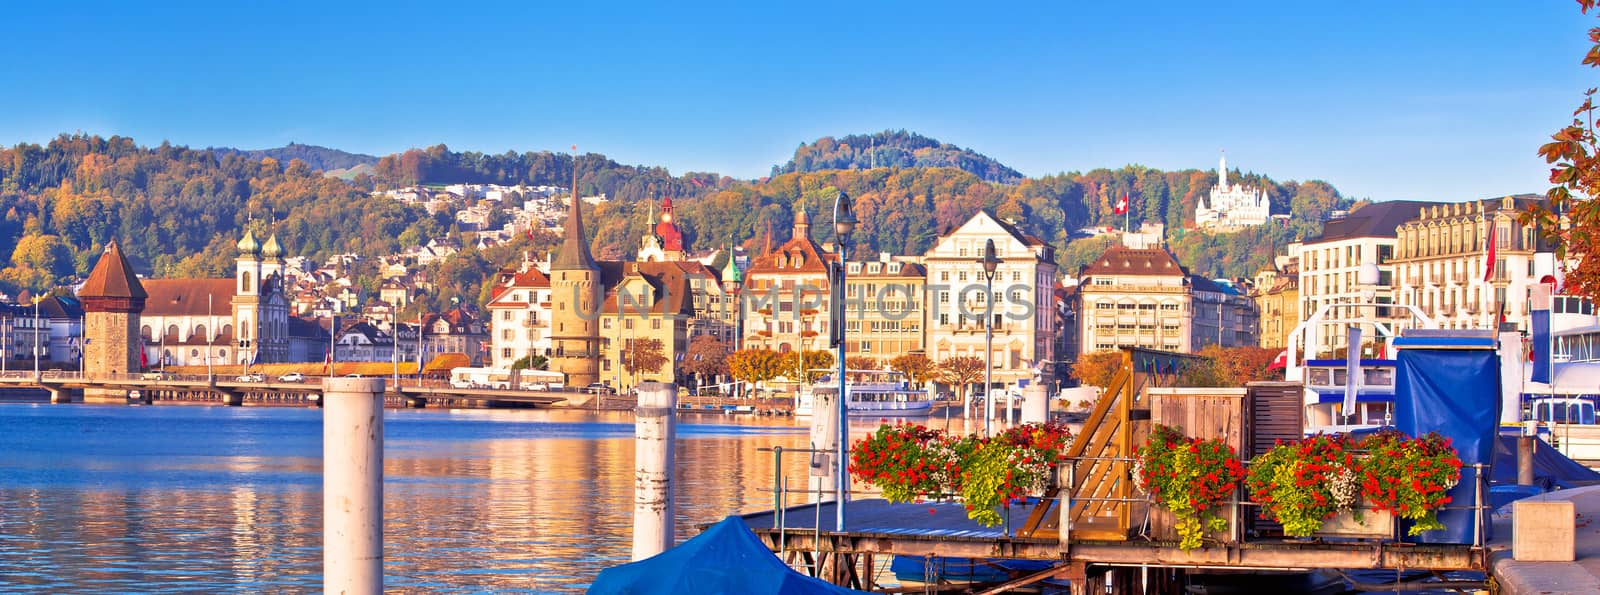 City of Lucerne lake waterfront and harbor panoramic view by xbrchx